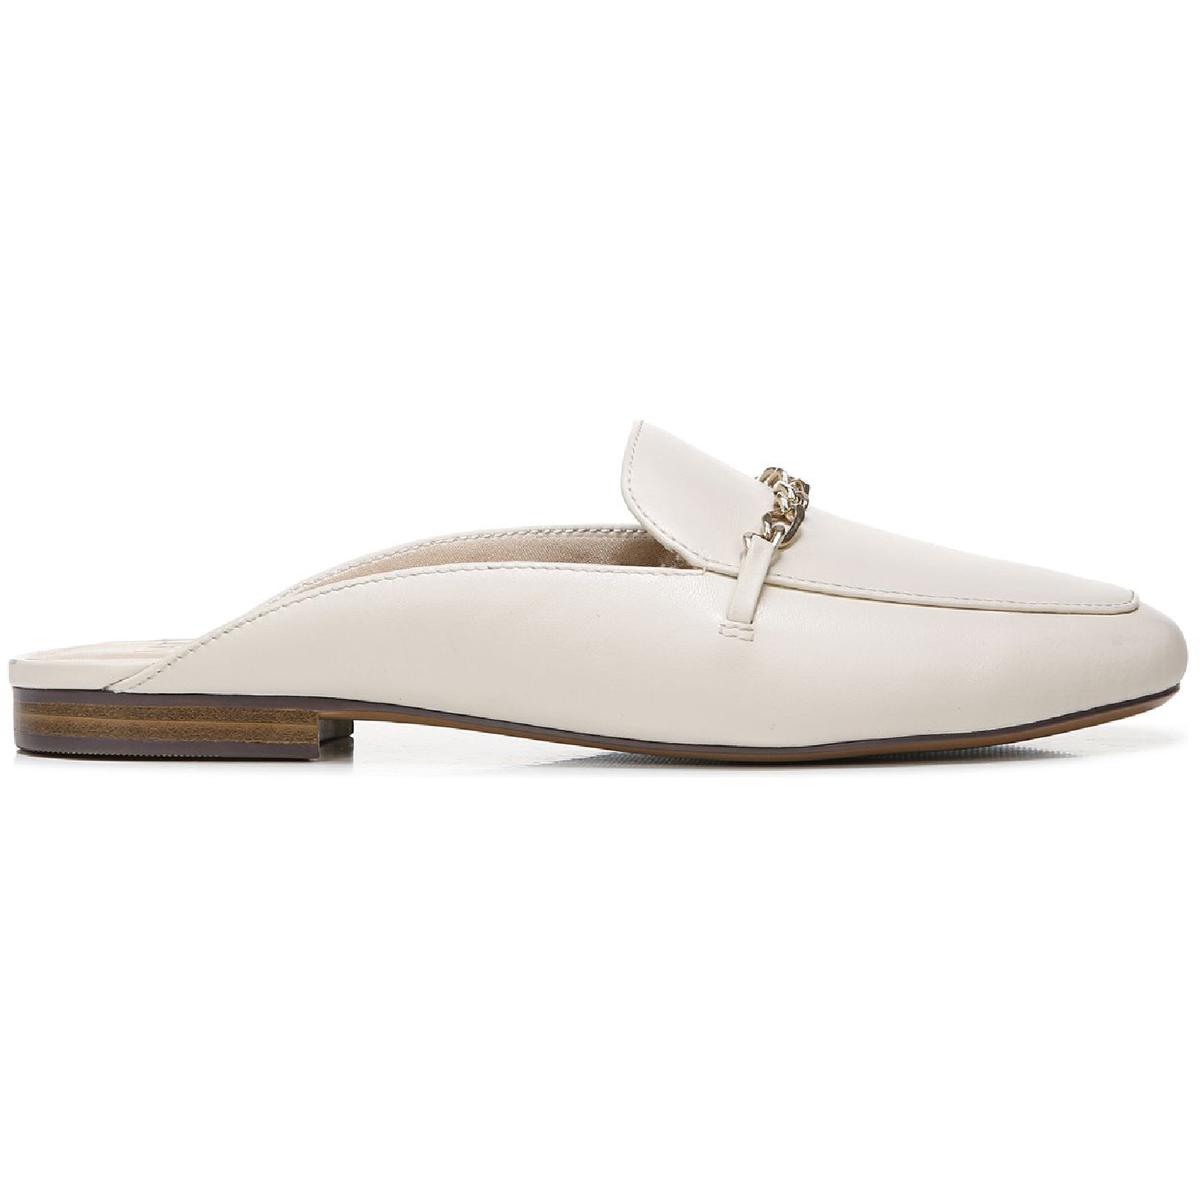 Naturalizer Womens Emiline Chain Slip On Loafer Mules Shoes BHFO 5990 ...